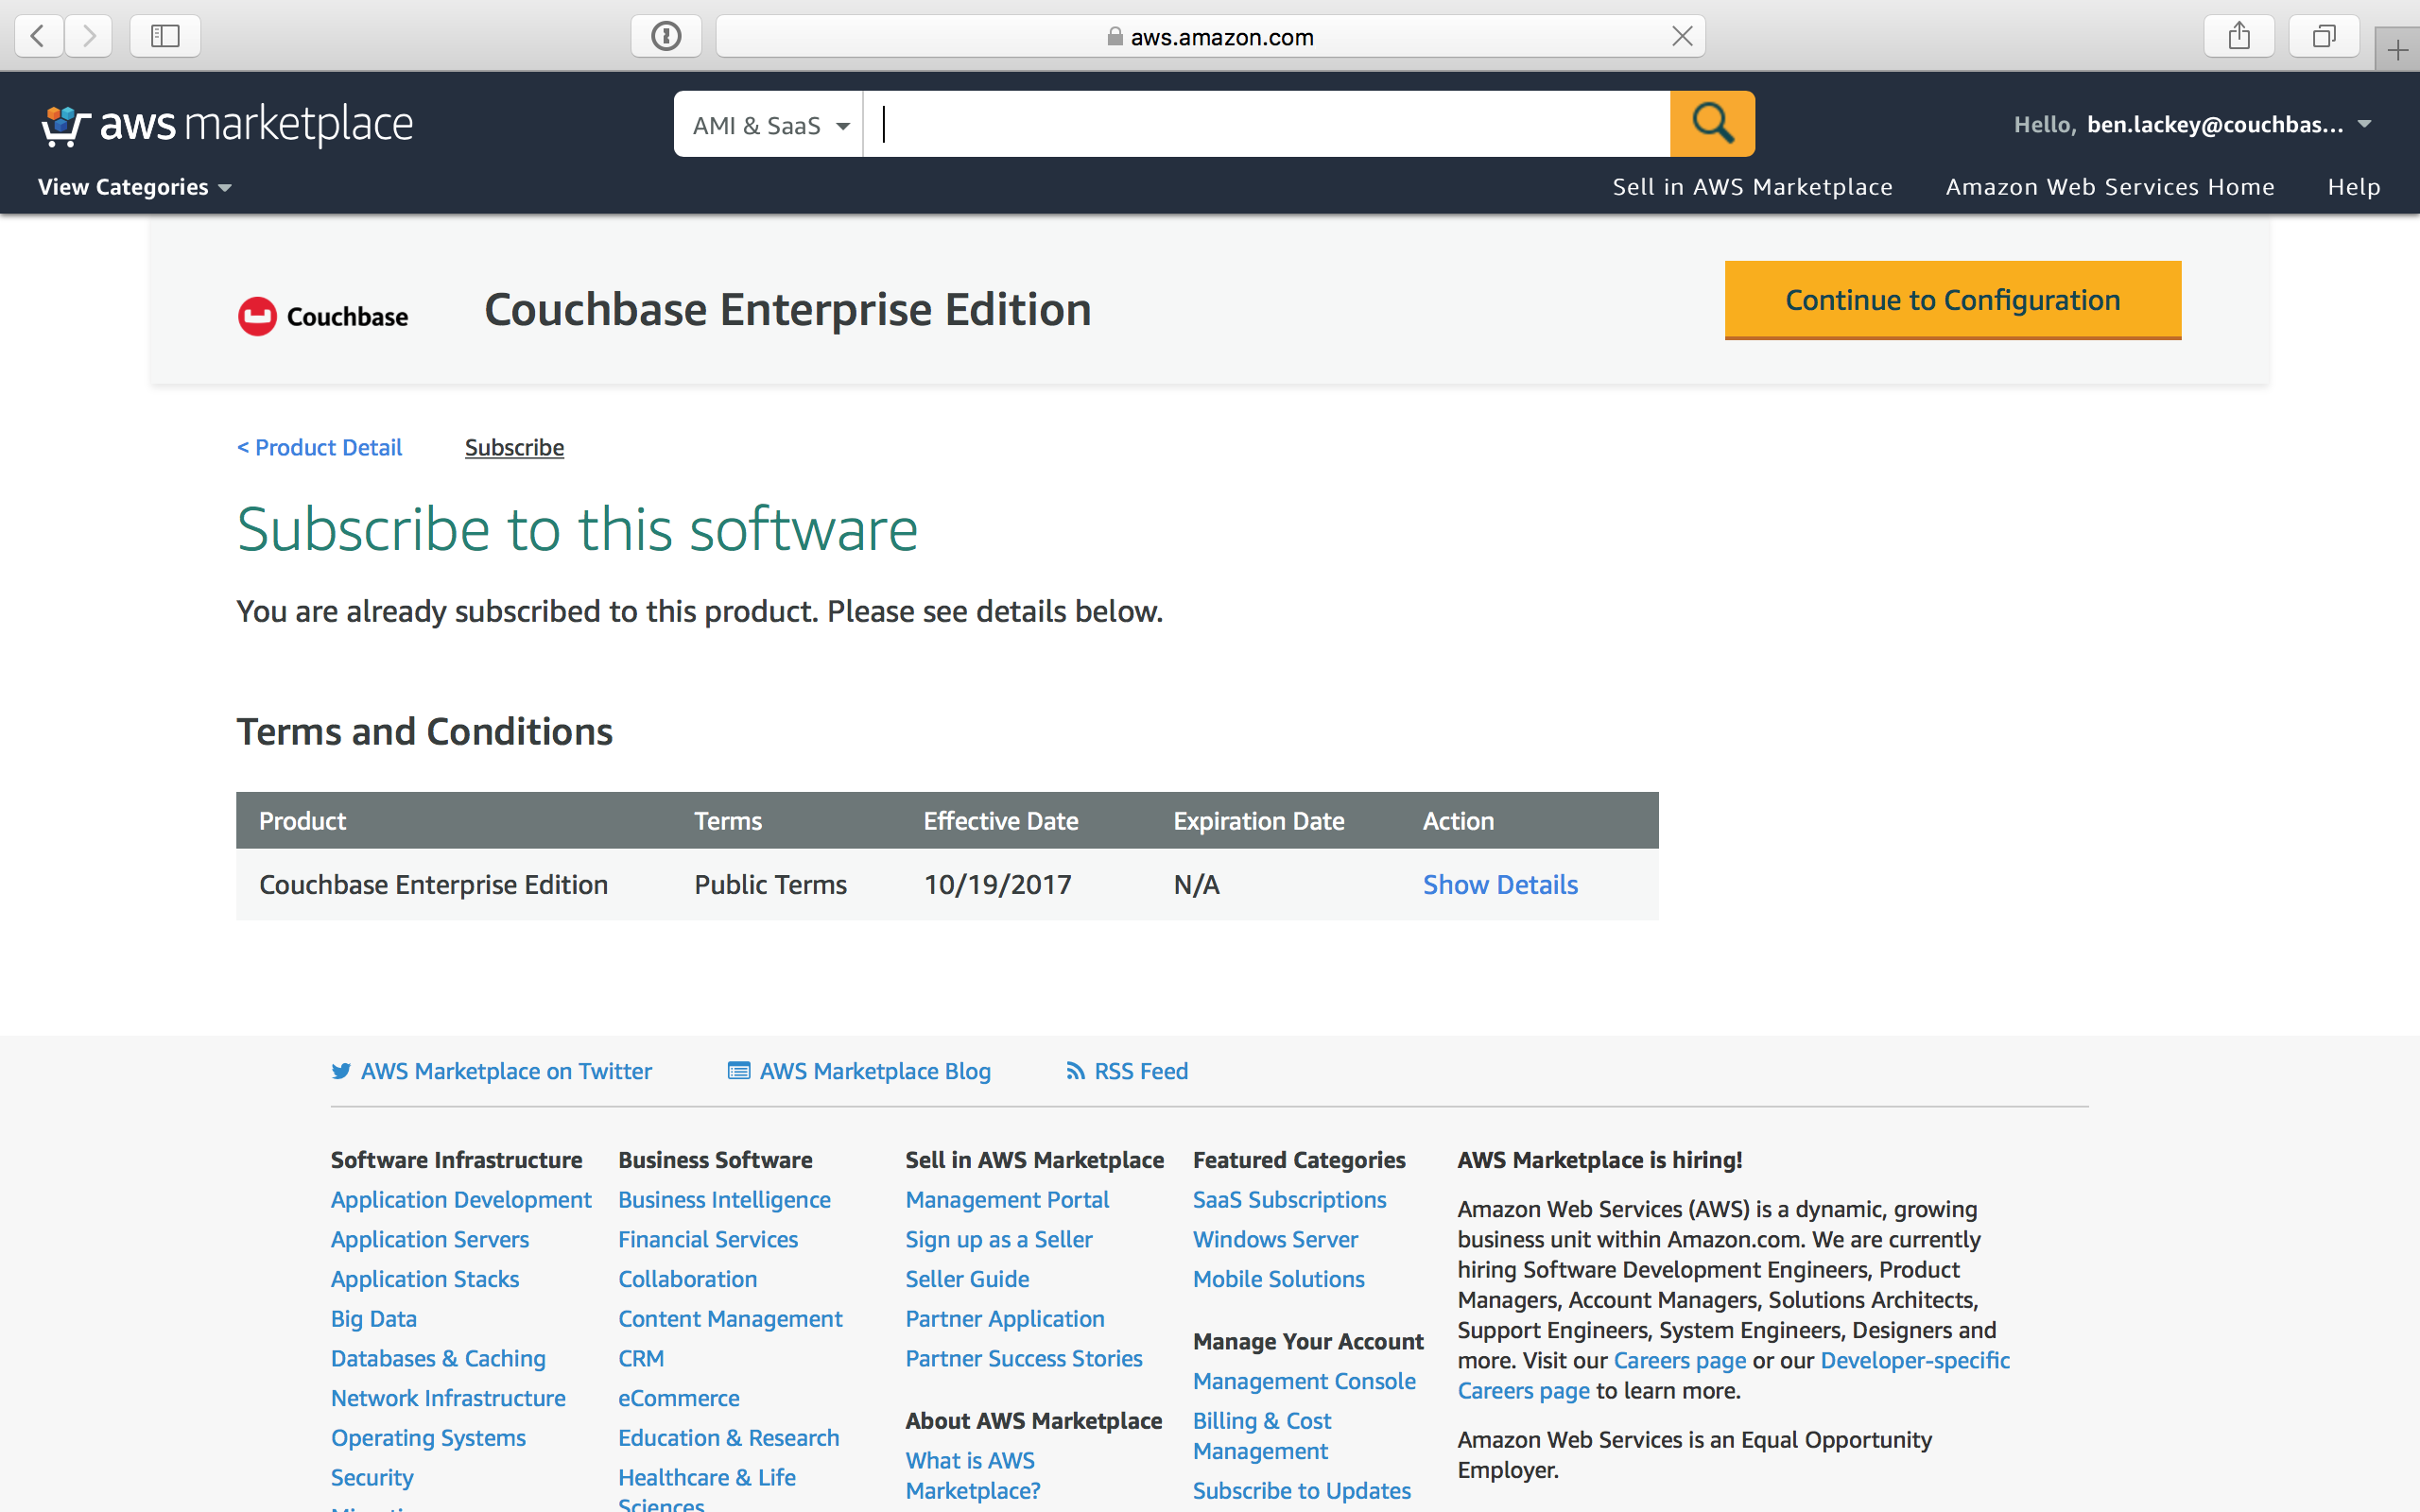 aws marketplace couchbase ee subscription public terms